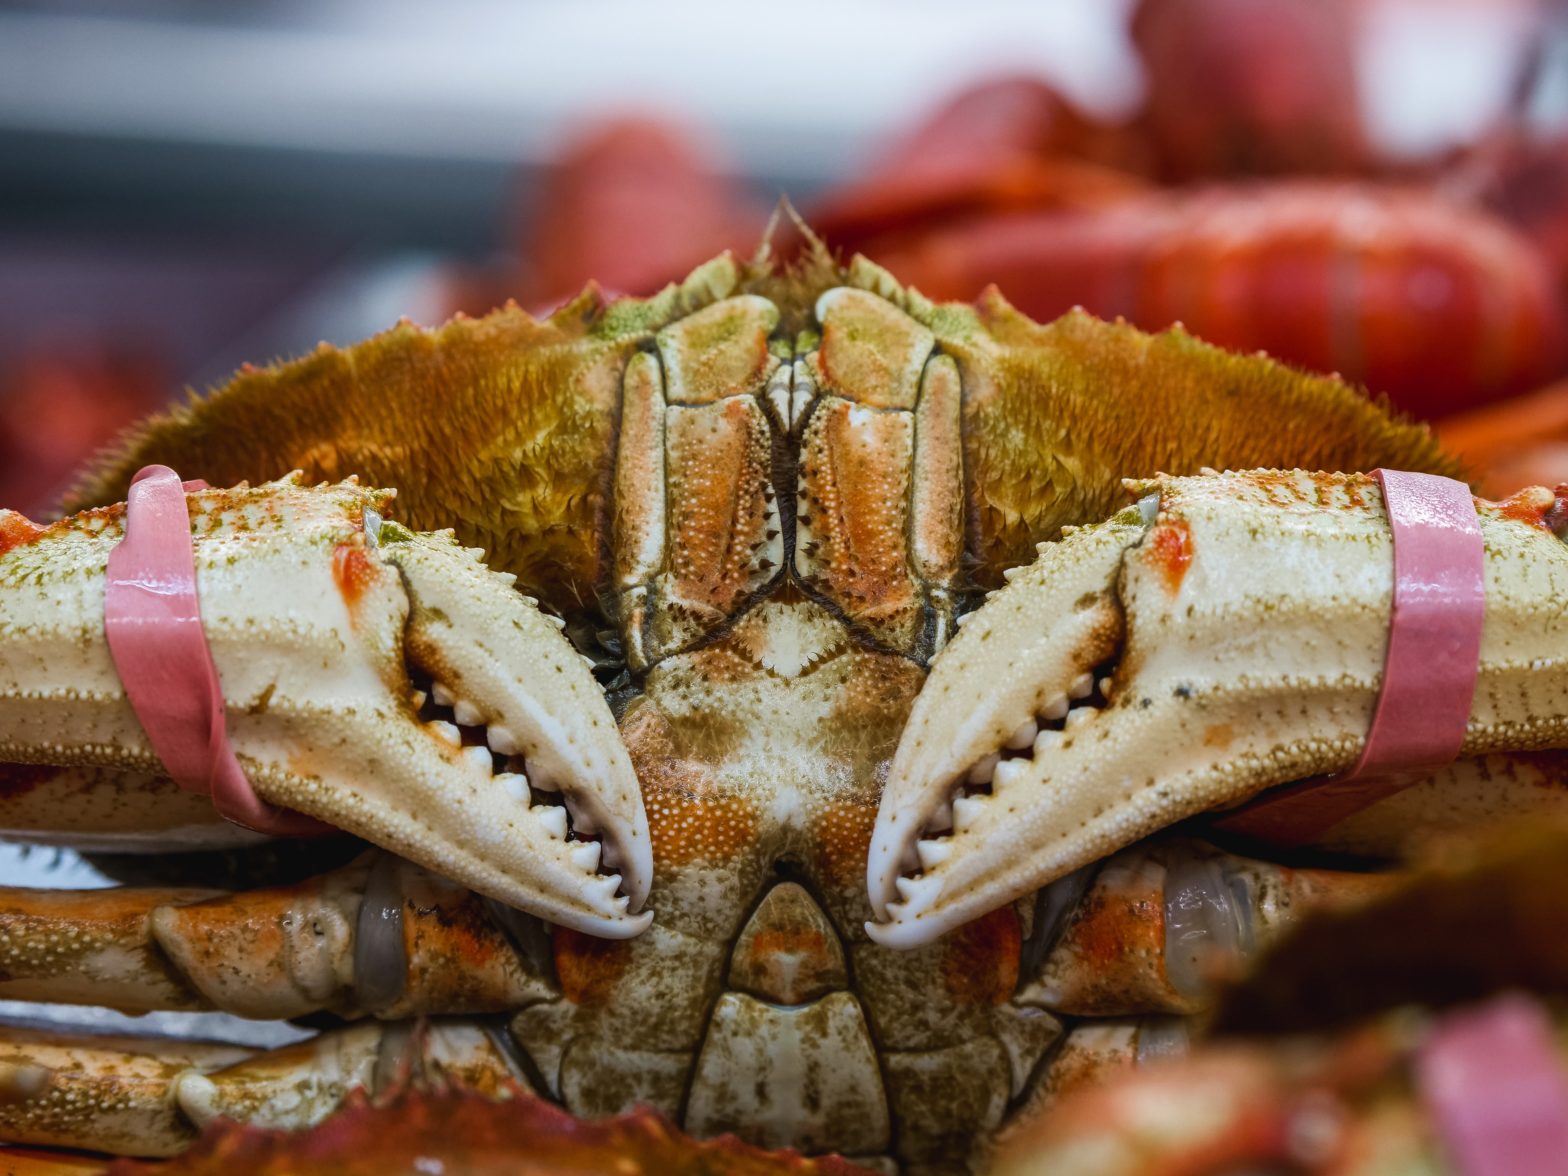 Enjoy An All-Expenses-Paid Trip To Seafood In Alaska